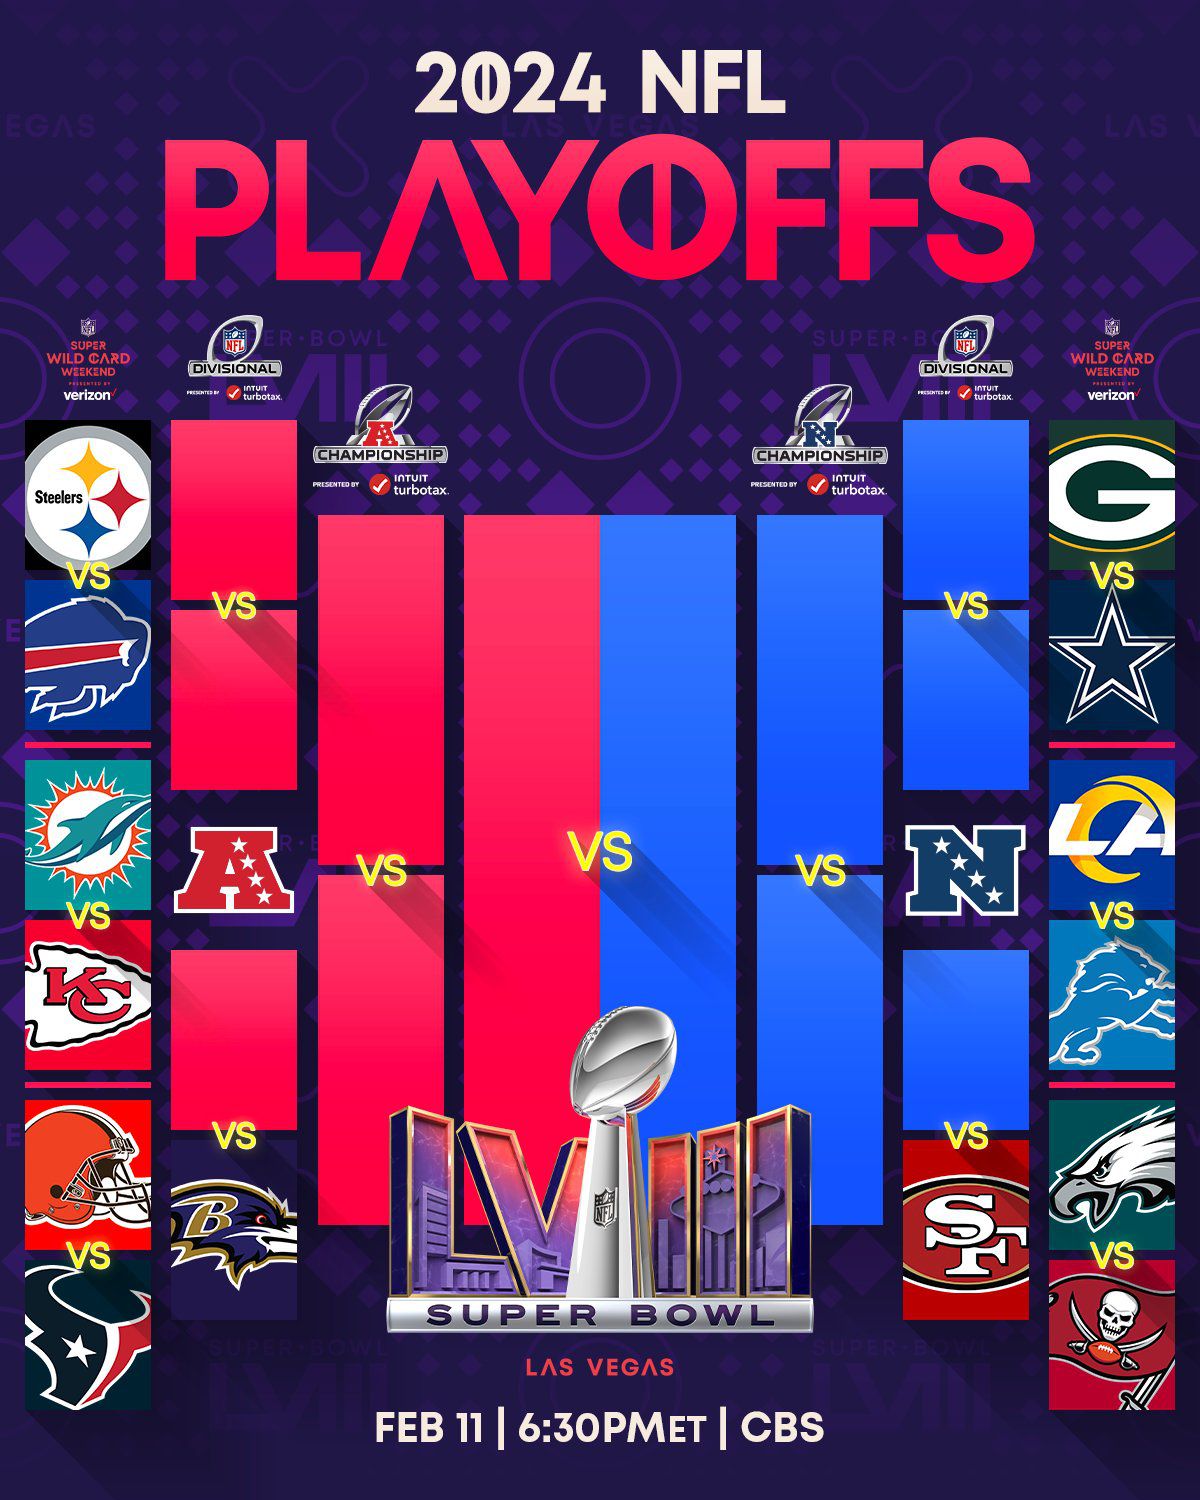 NFL Playoffs 2024 Bracket, TV times, matchups, and scores for Wild